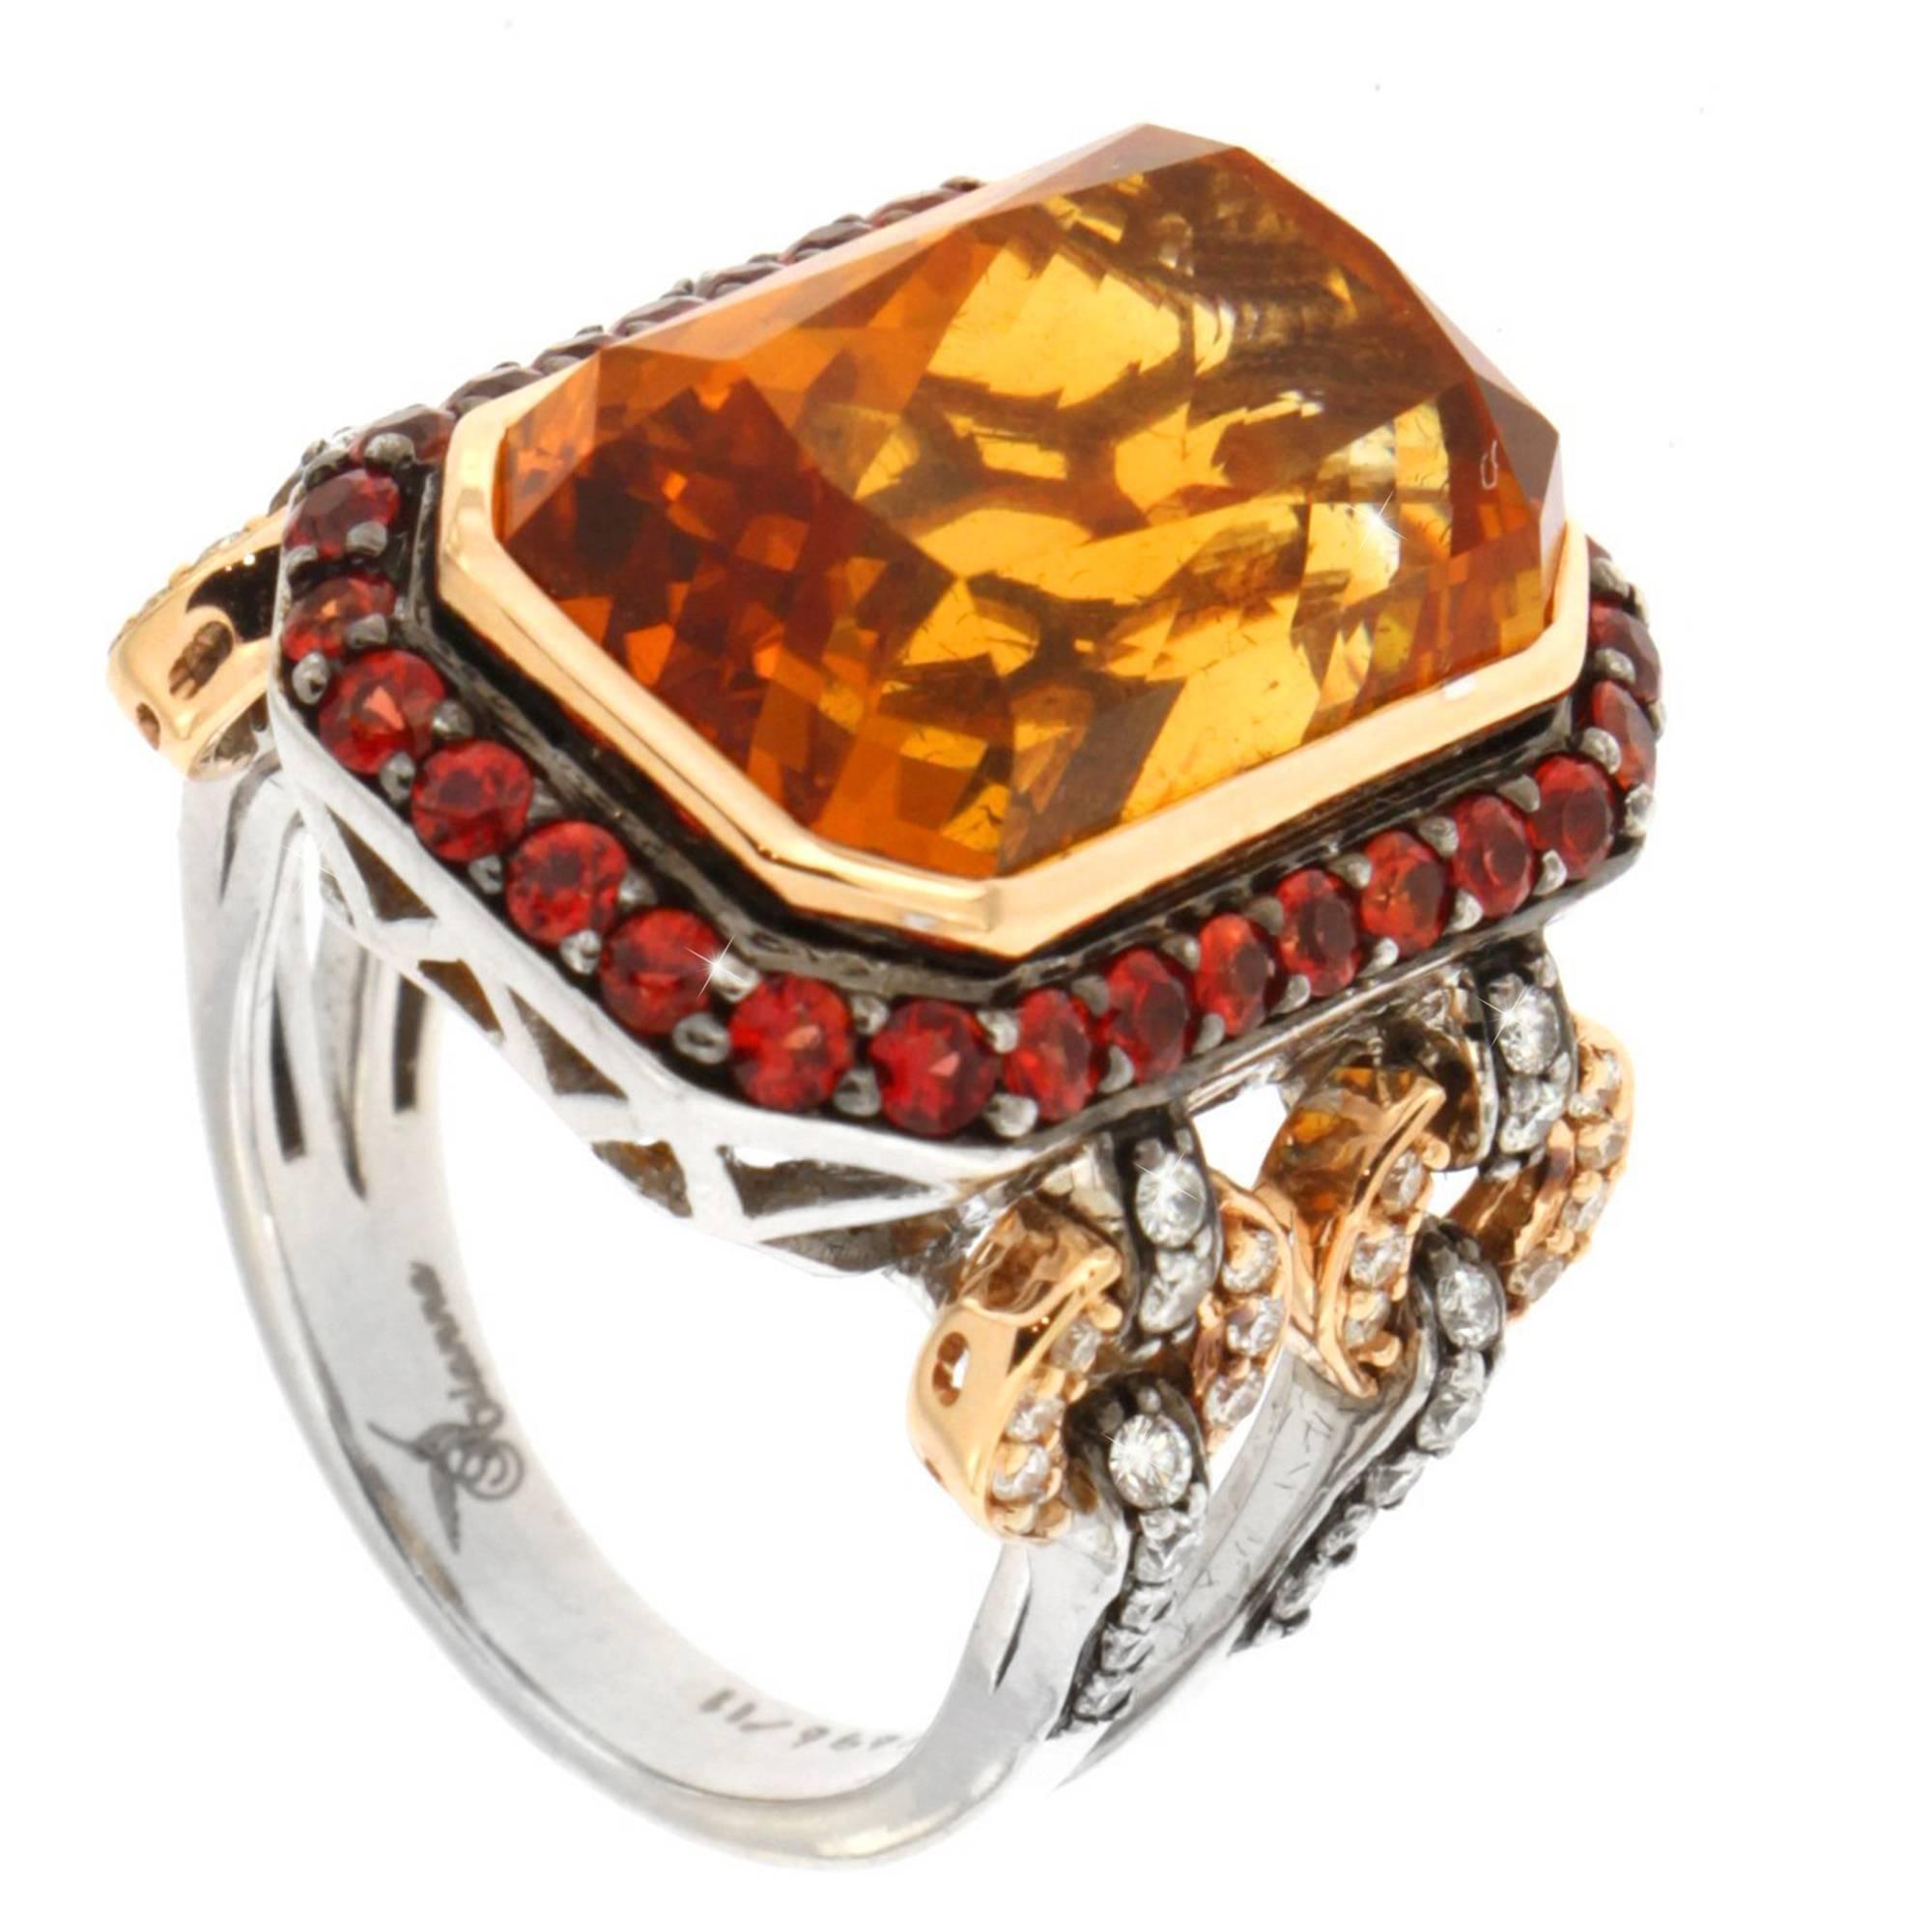 Absolutely eye catching bright orange emerald cut citrine surrounded by pave set red sapphires. This modern and bold design is accentuated with circles of  rose gold an shimmering diamonds on the sides. This ring is a size 7 and can be sized

 